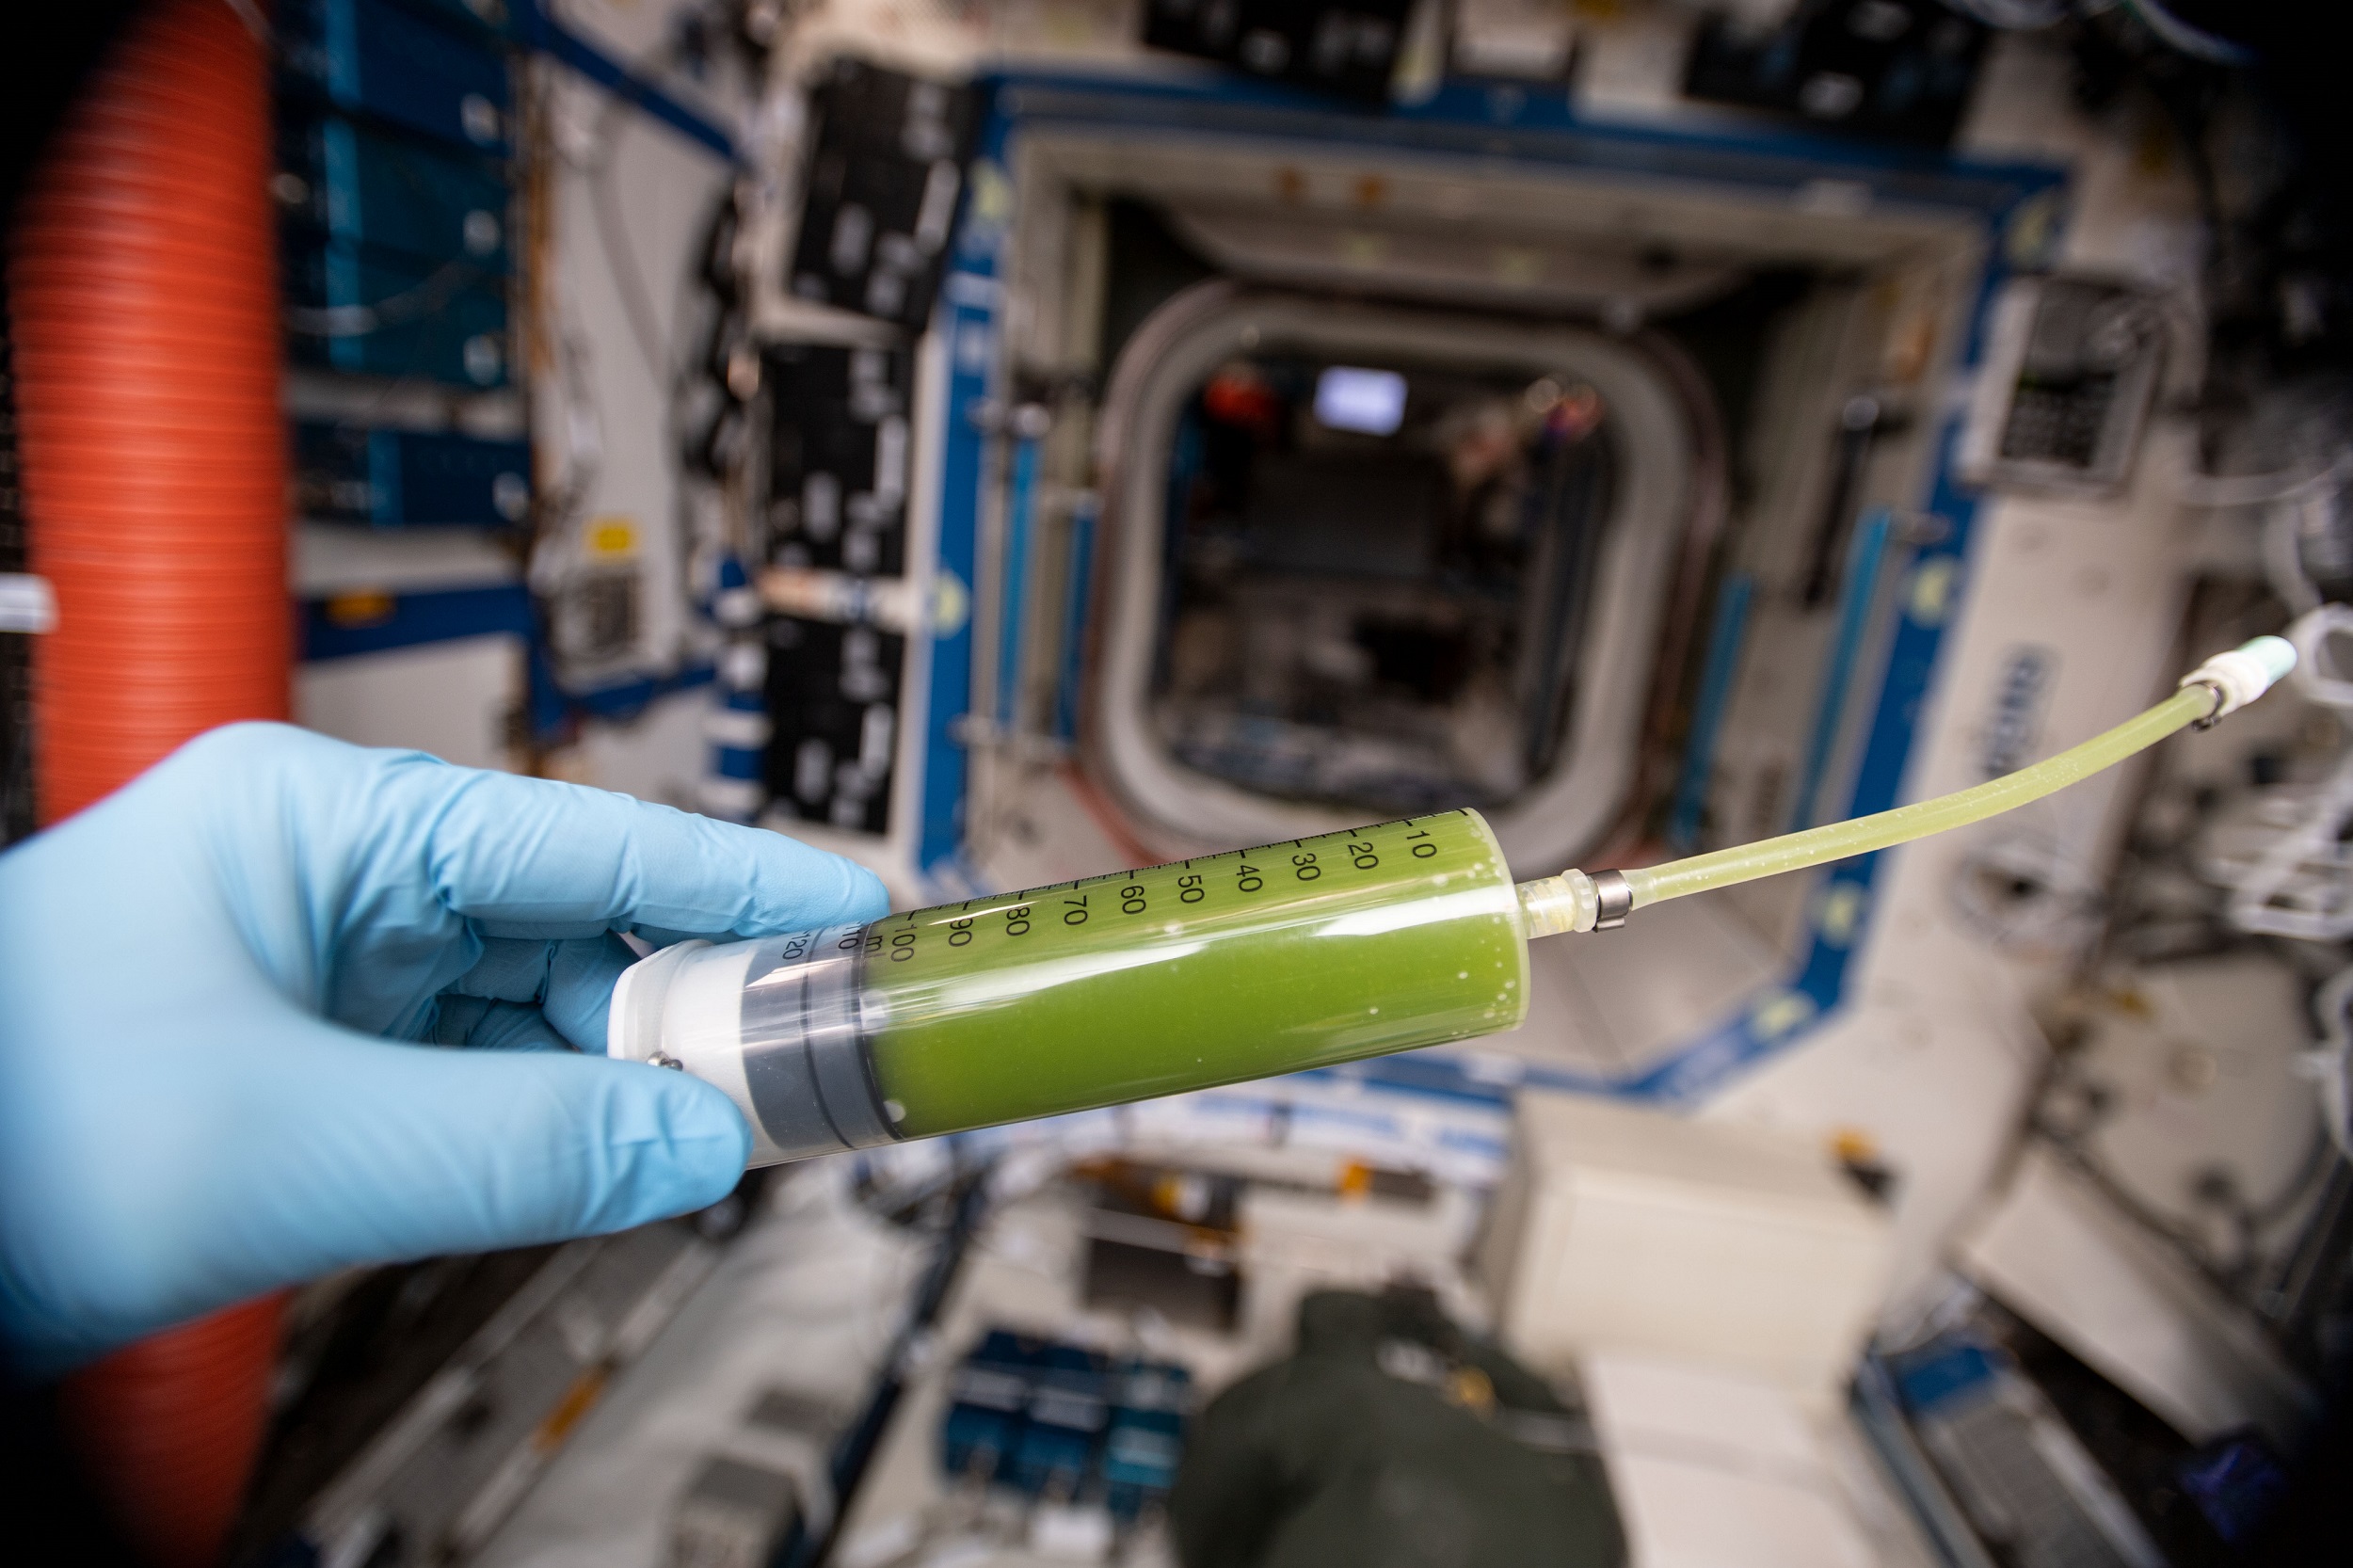 a syringe full of green liquid, held by a hand in a blue glove